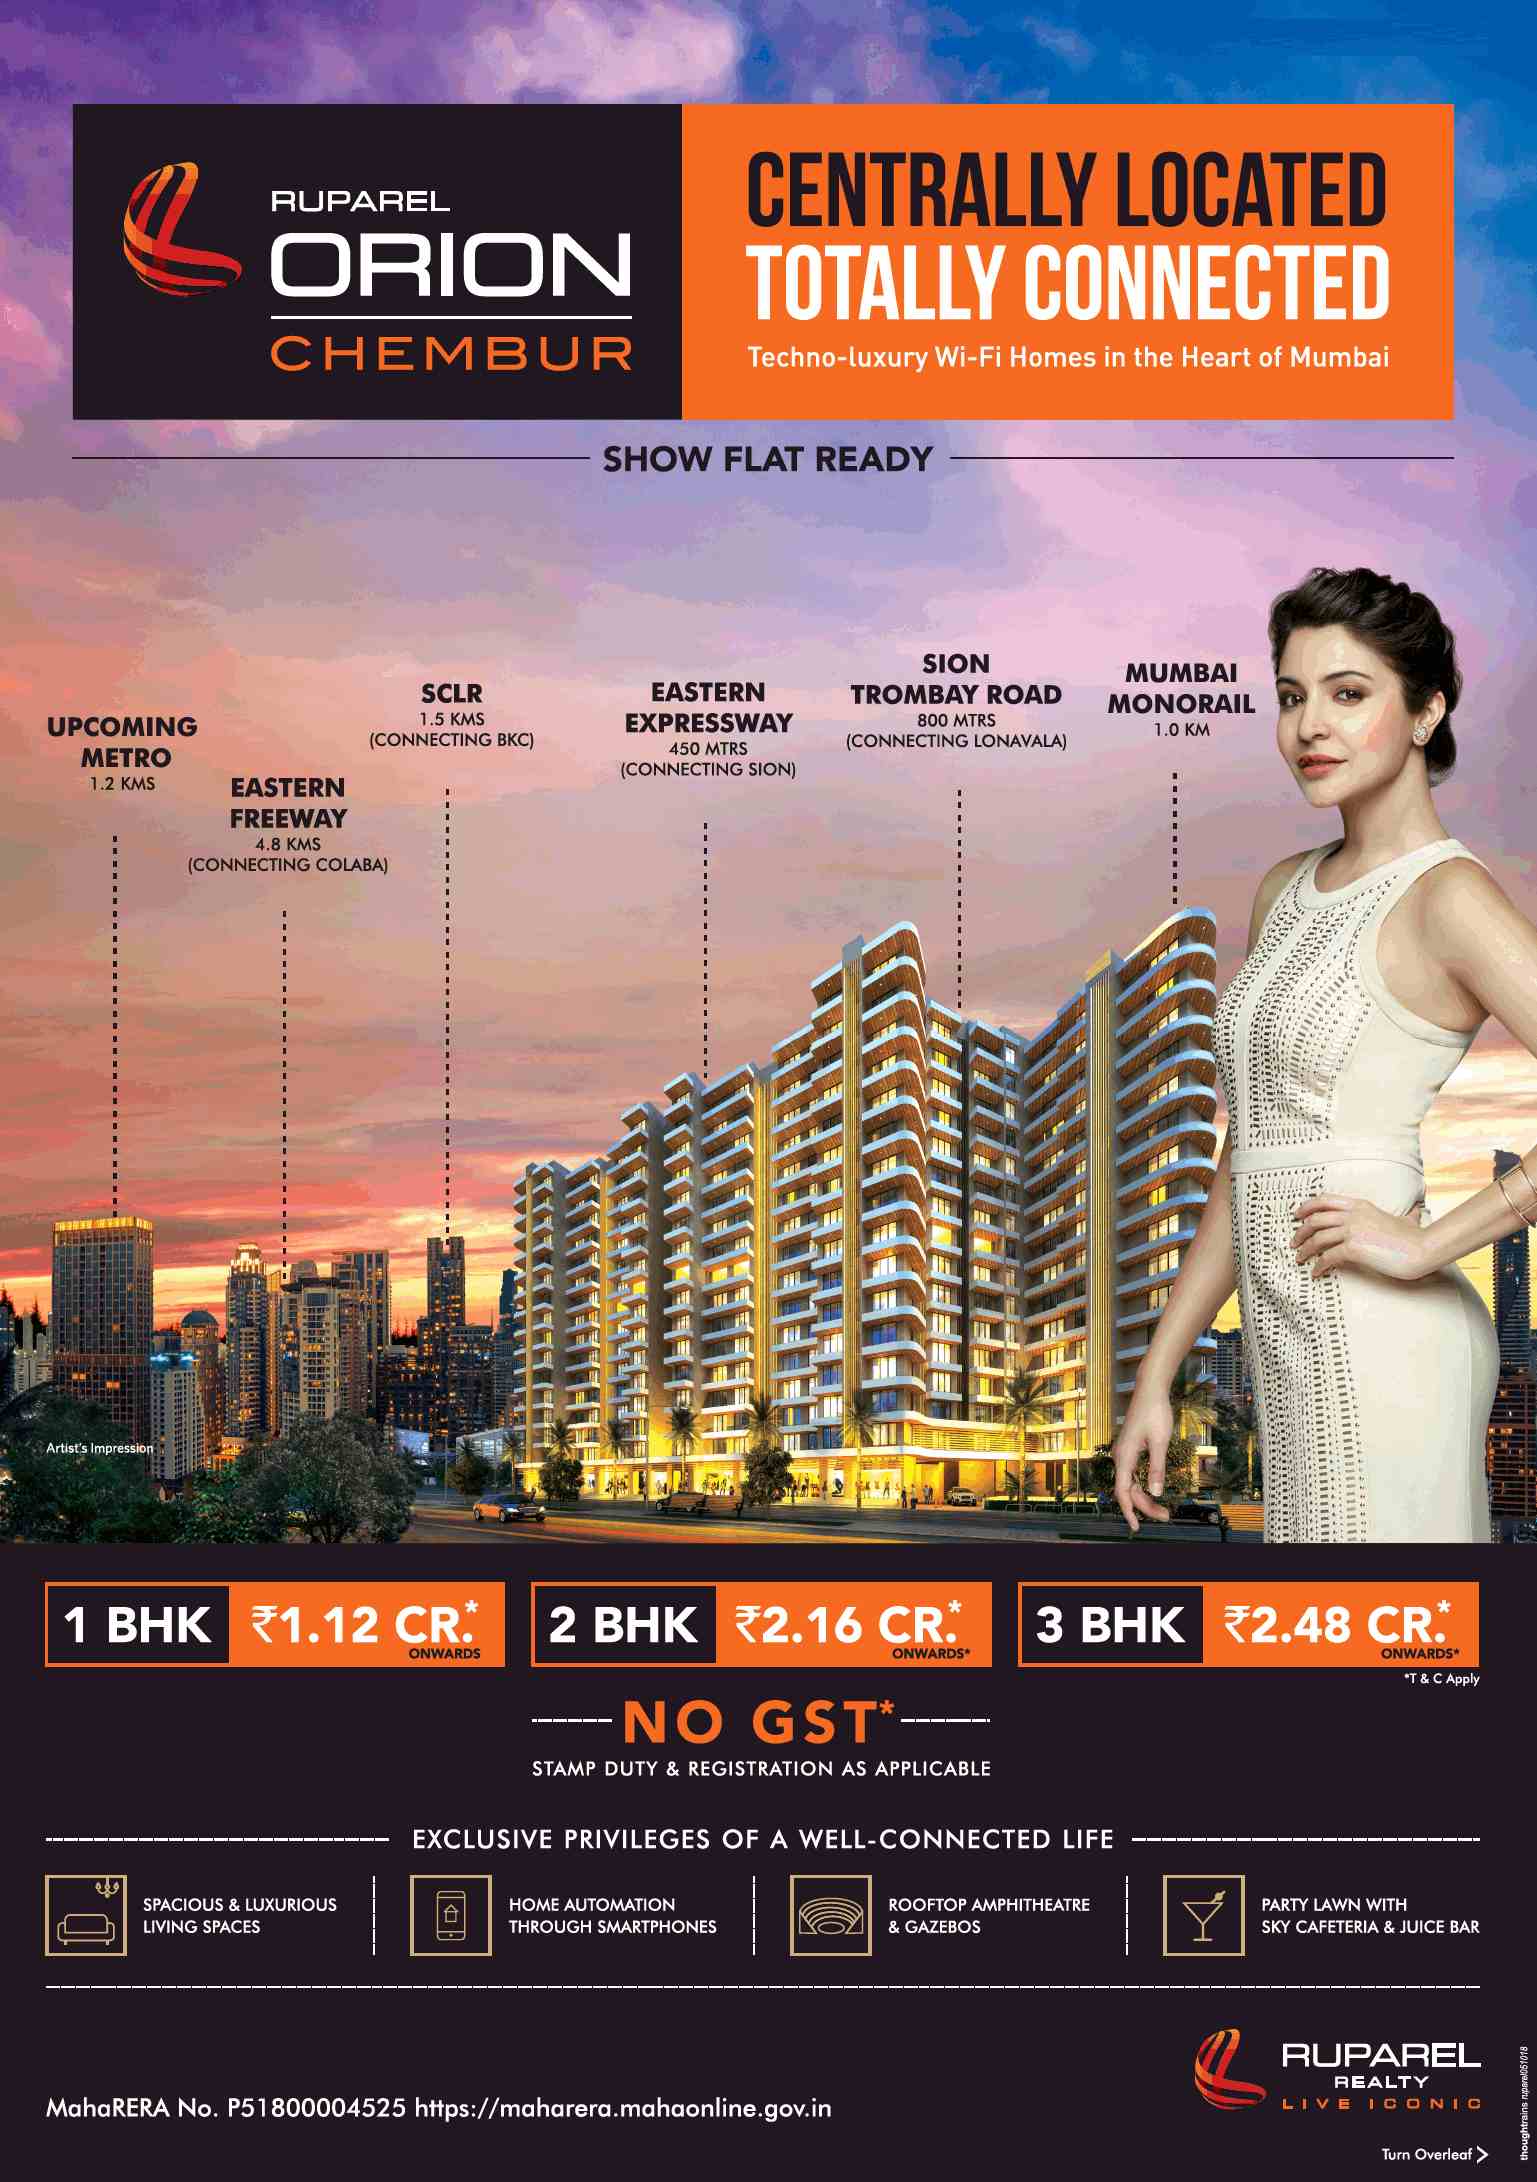 Show flat ready for visit at Ruparel Orion in Chembur, Mumbai Update